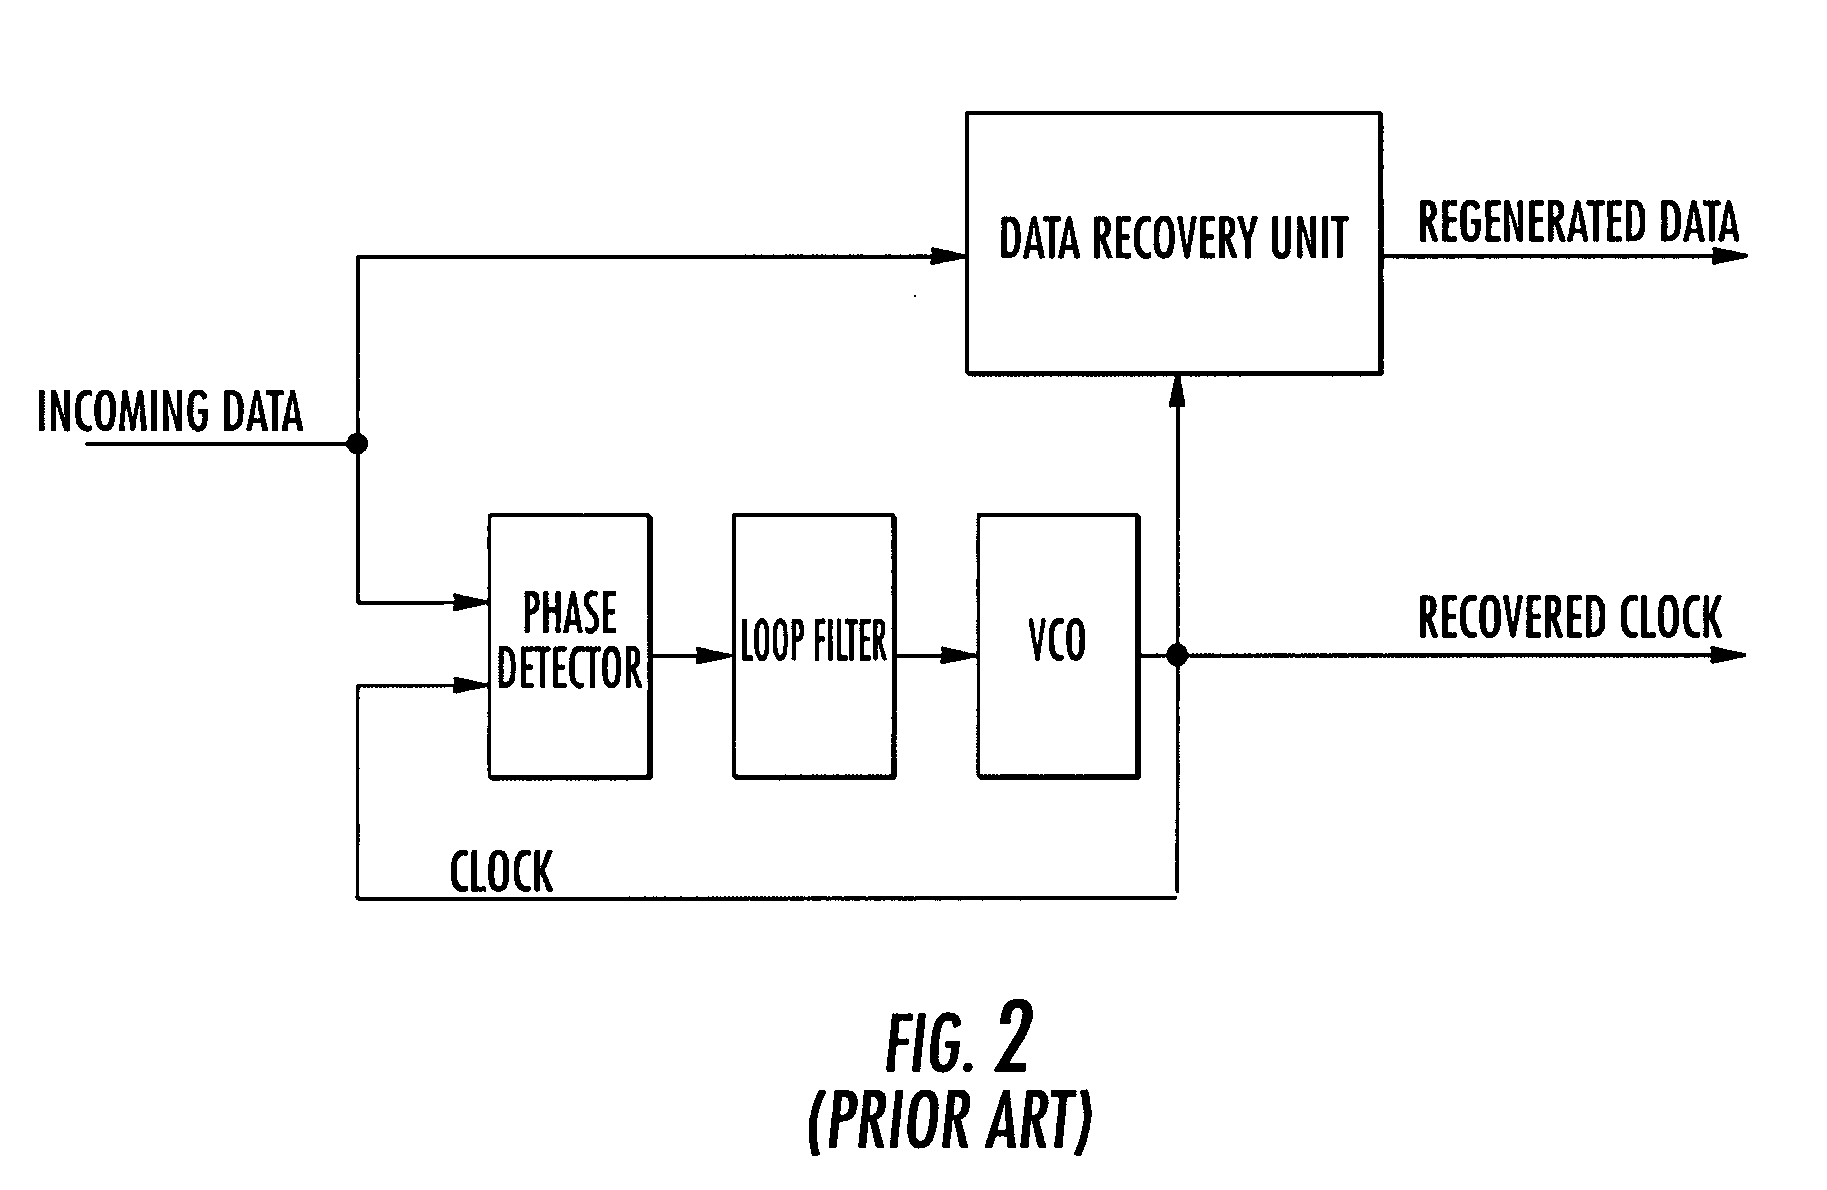 Feed forward clock and data recovery unit